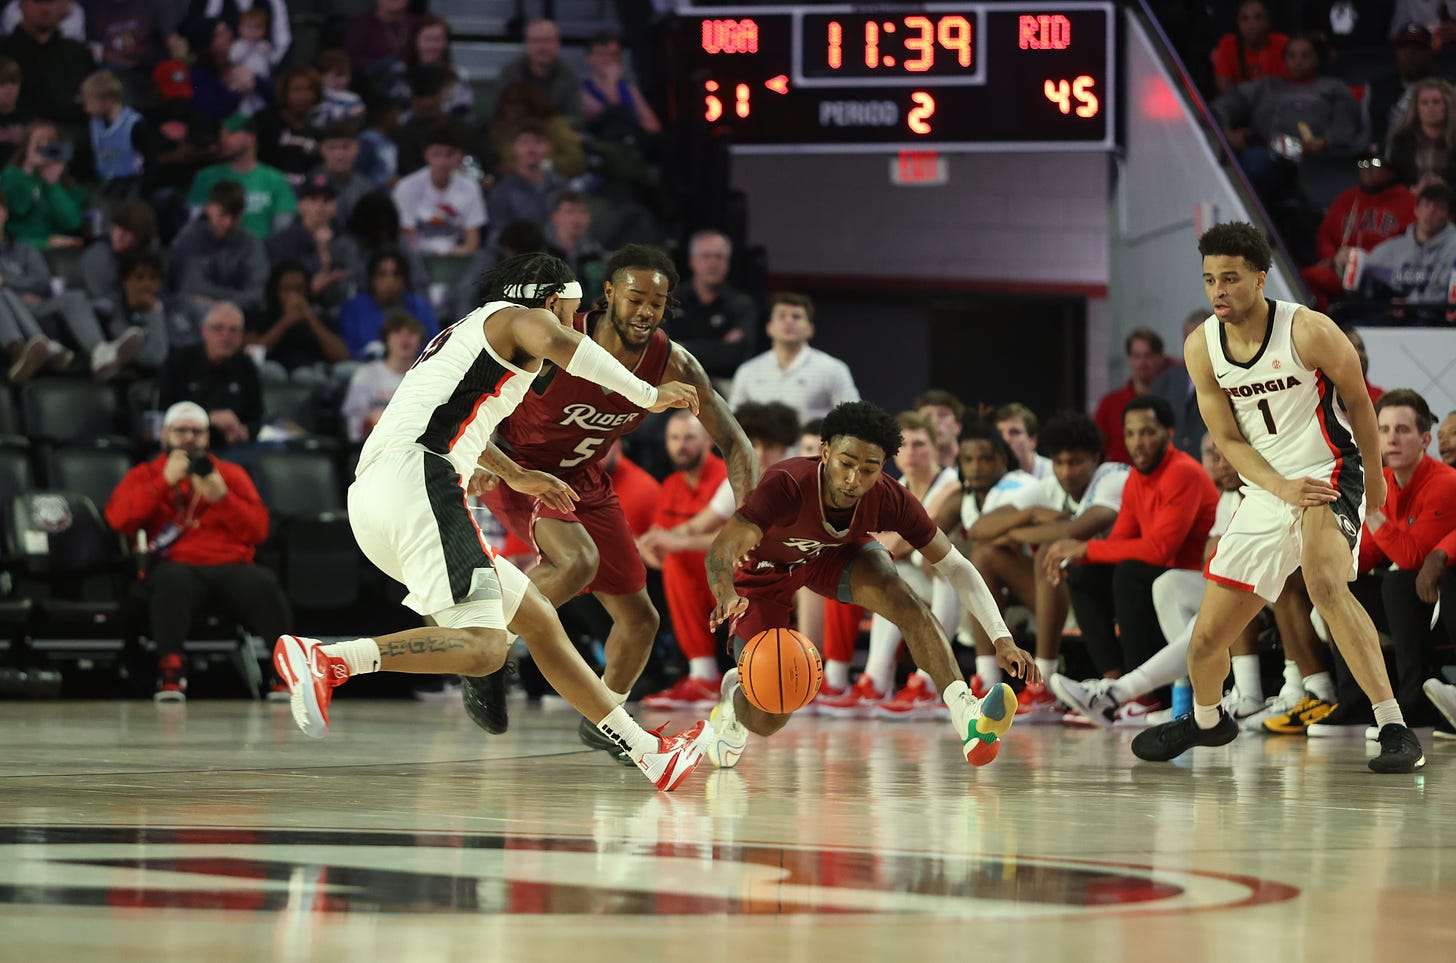 Rider’s Mervin James (5) and Allen Powell go for a loose ball against Georgia on Dec. 28, 2022. (Photo courtesy of Rider Athletics)